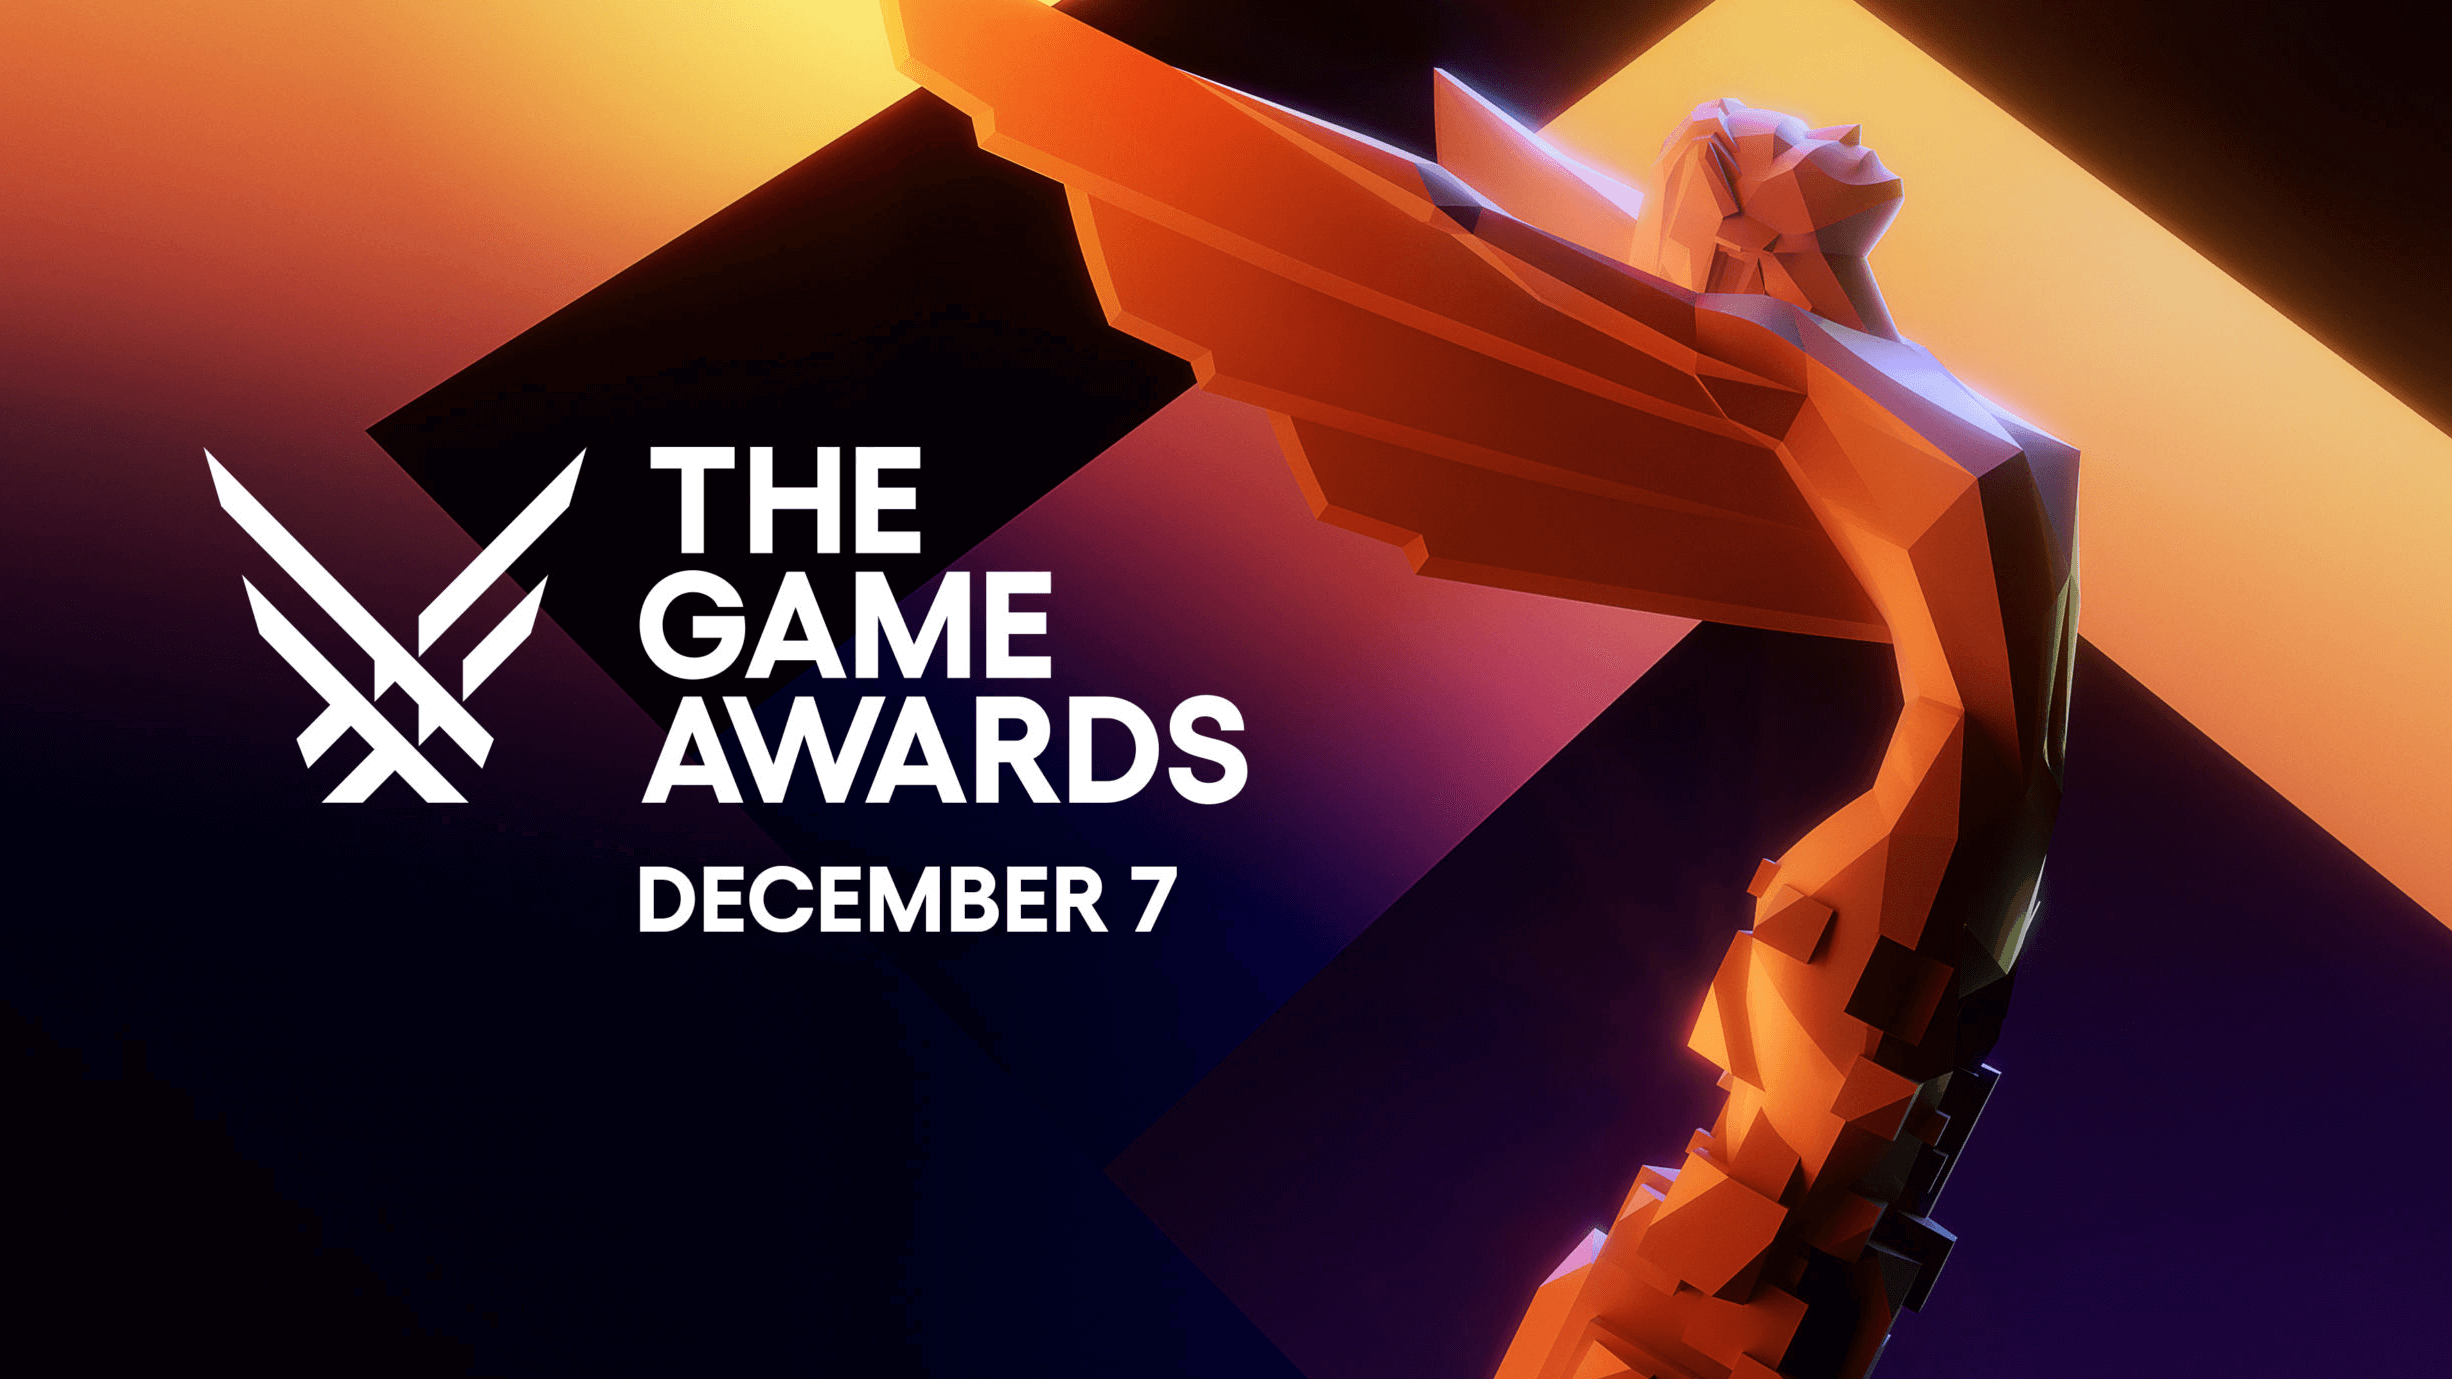 The Game Awards Nominees - SF6 & MK1 For 5 Nominations